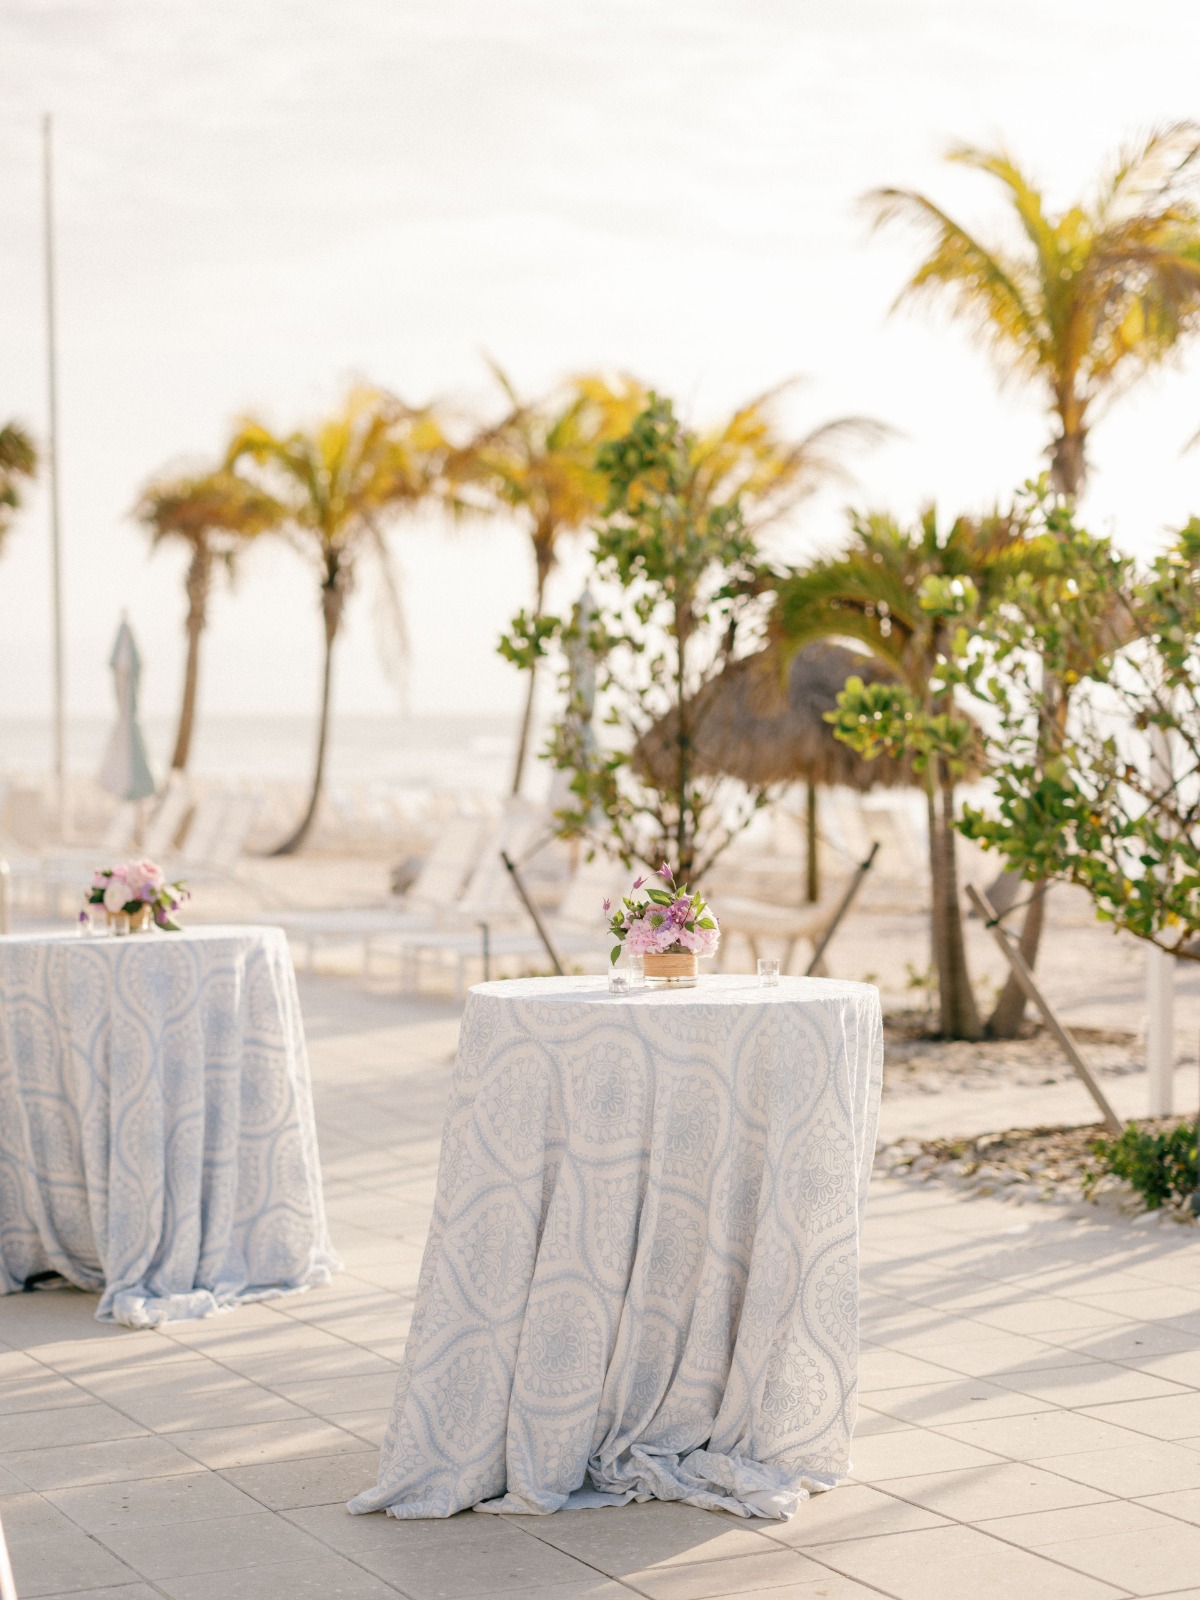 Cocktail hour tables with tableclothes and centerpieces